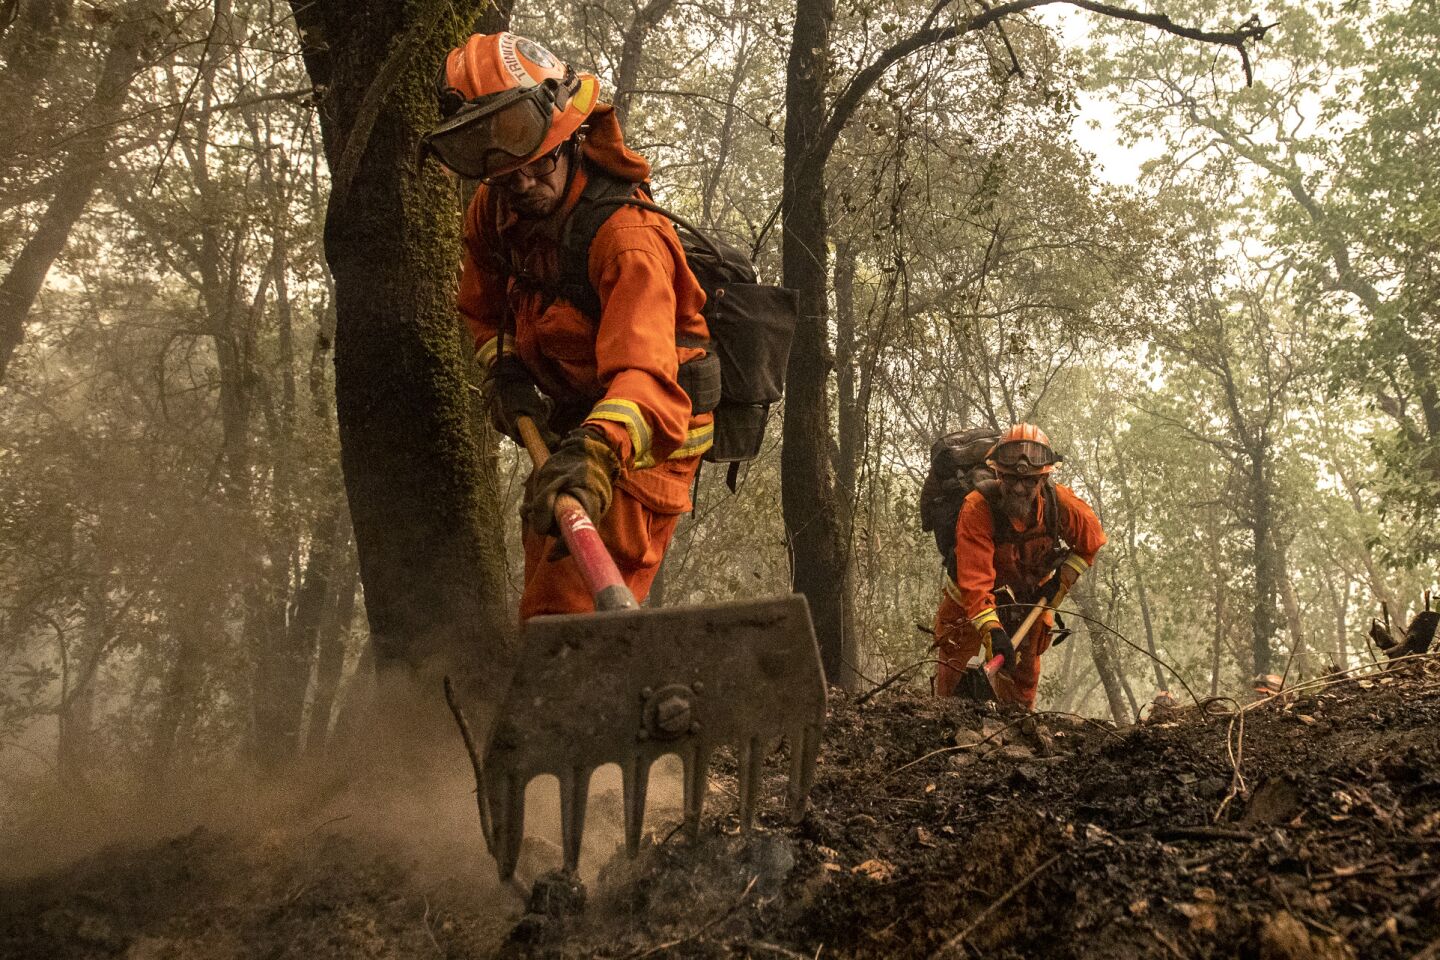 Two men wearing orange suits use hand tools to dig into the earth after a fire burned through.